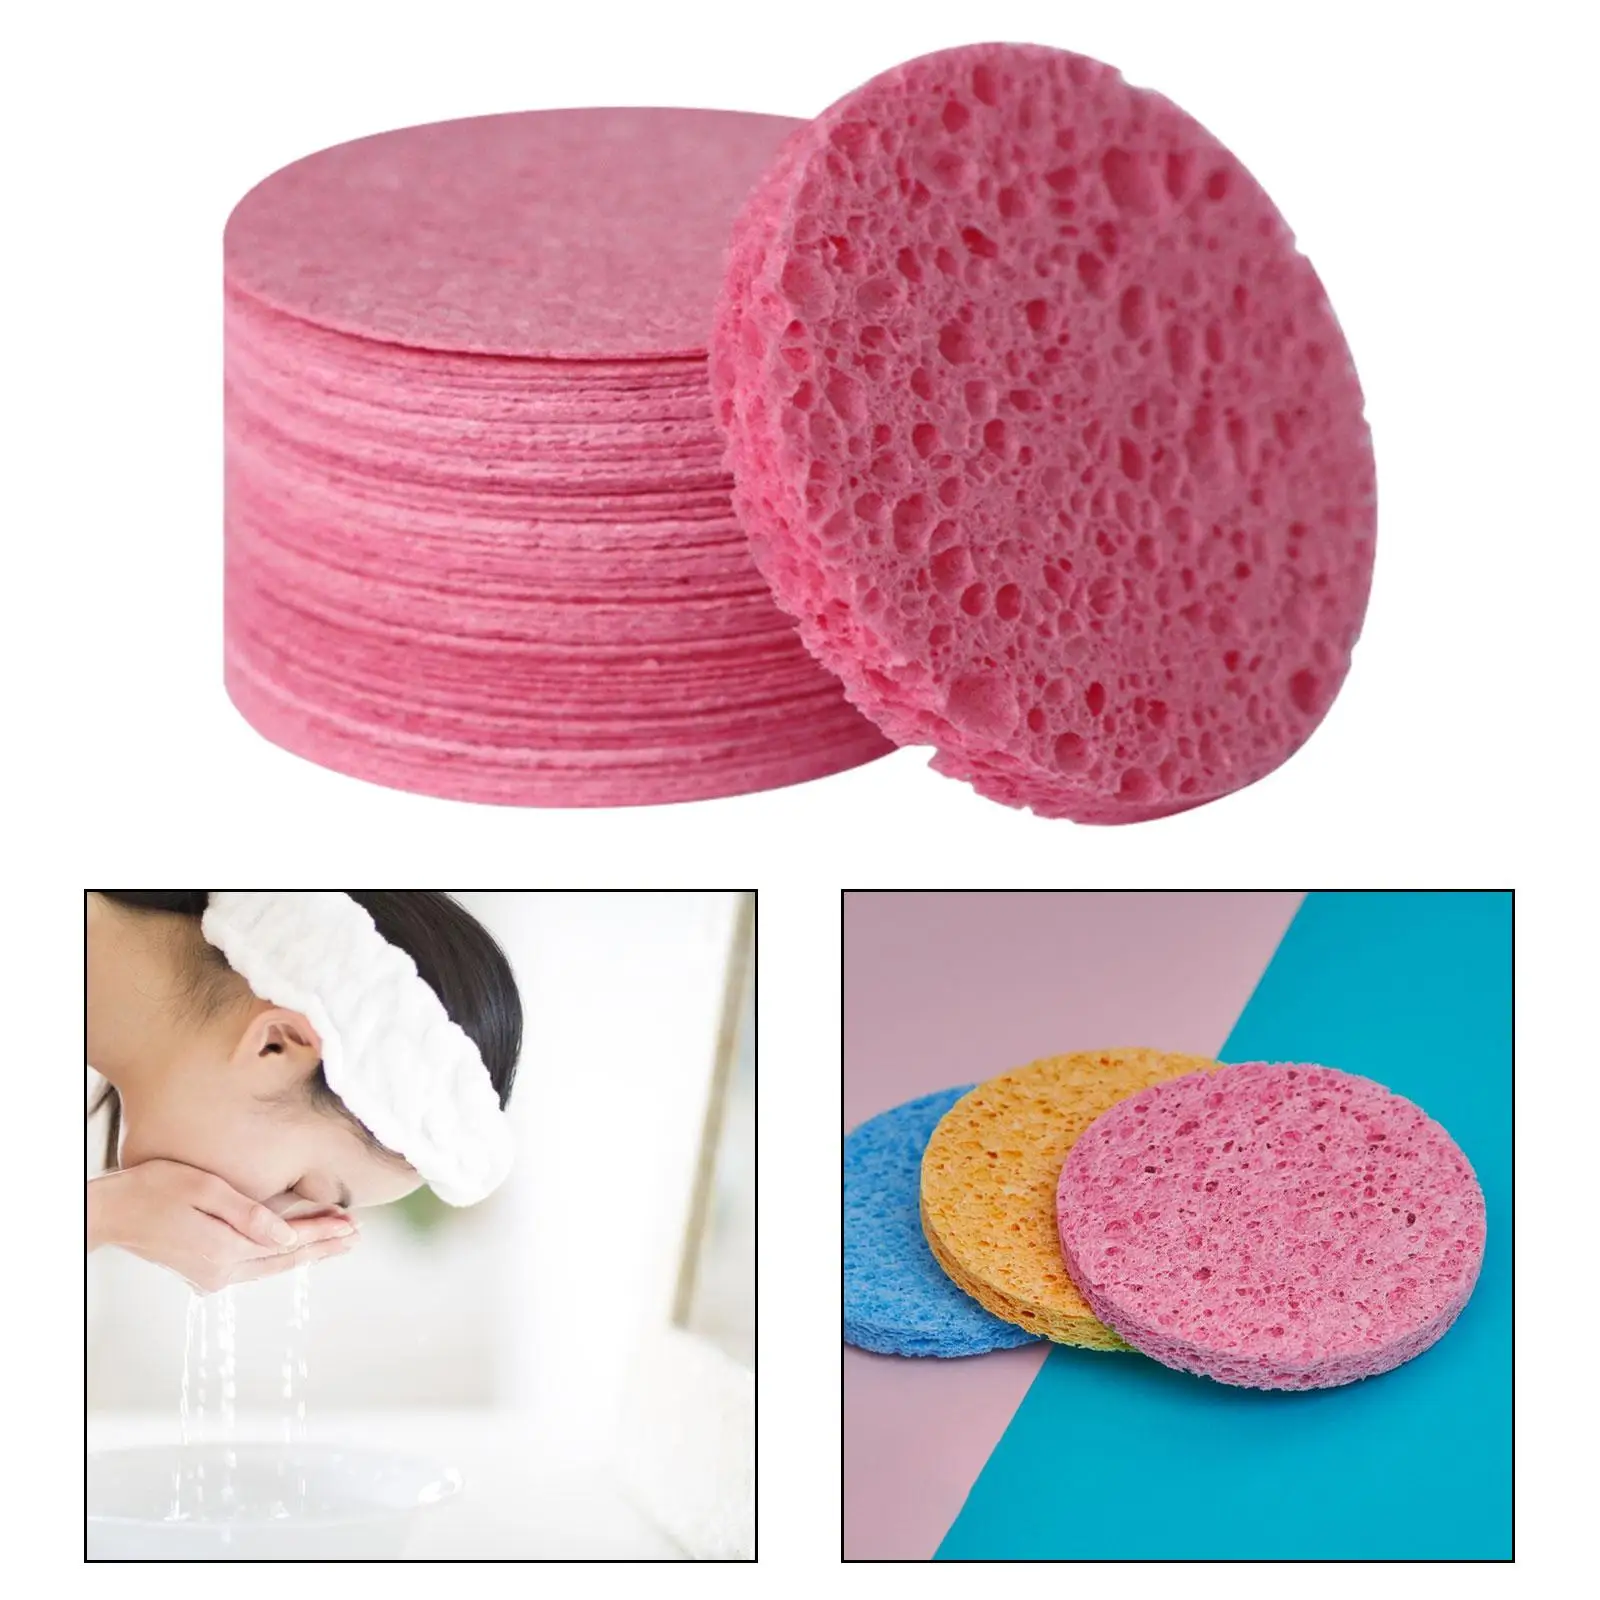 5xFacial Cleansing Sponges Absorbent Professional Durable Mask Removal Sponges